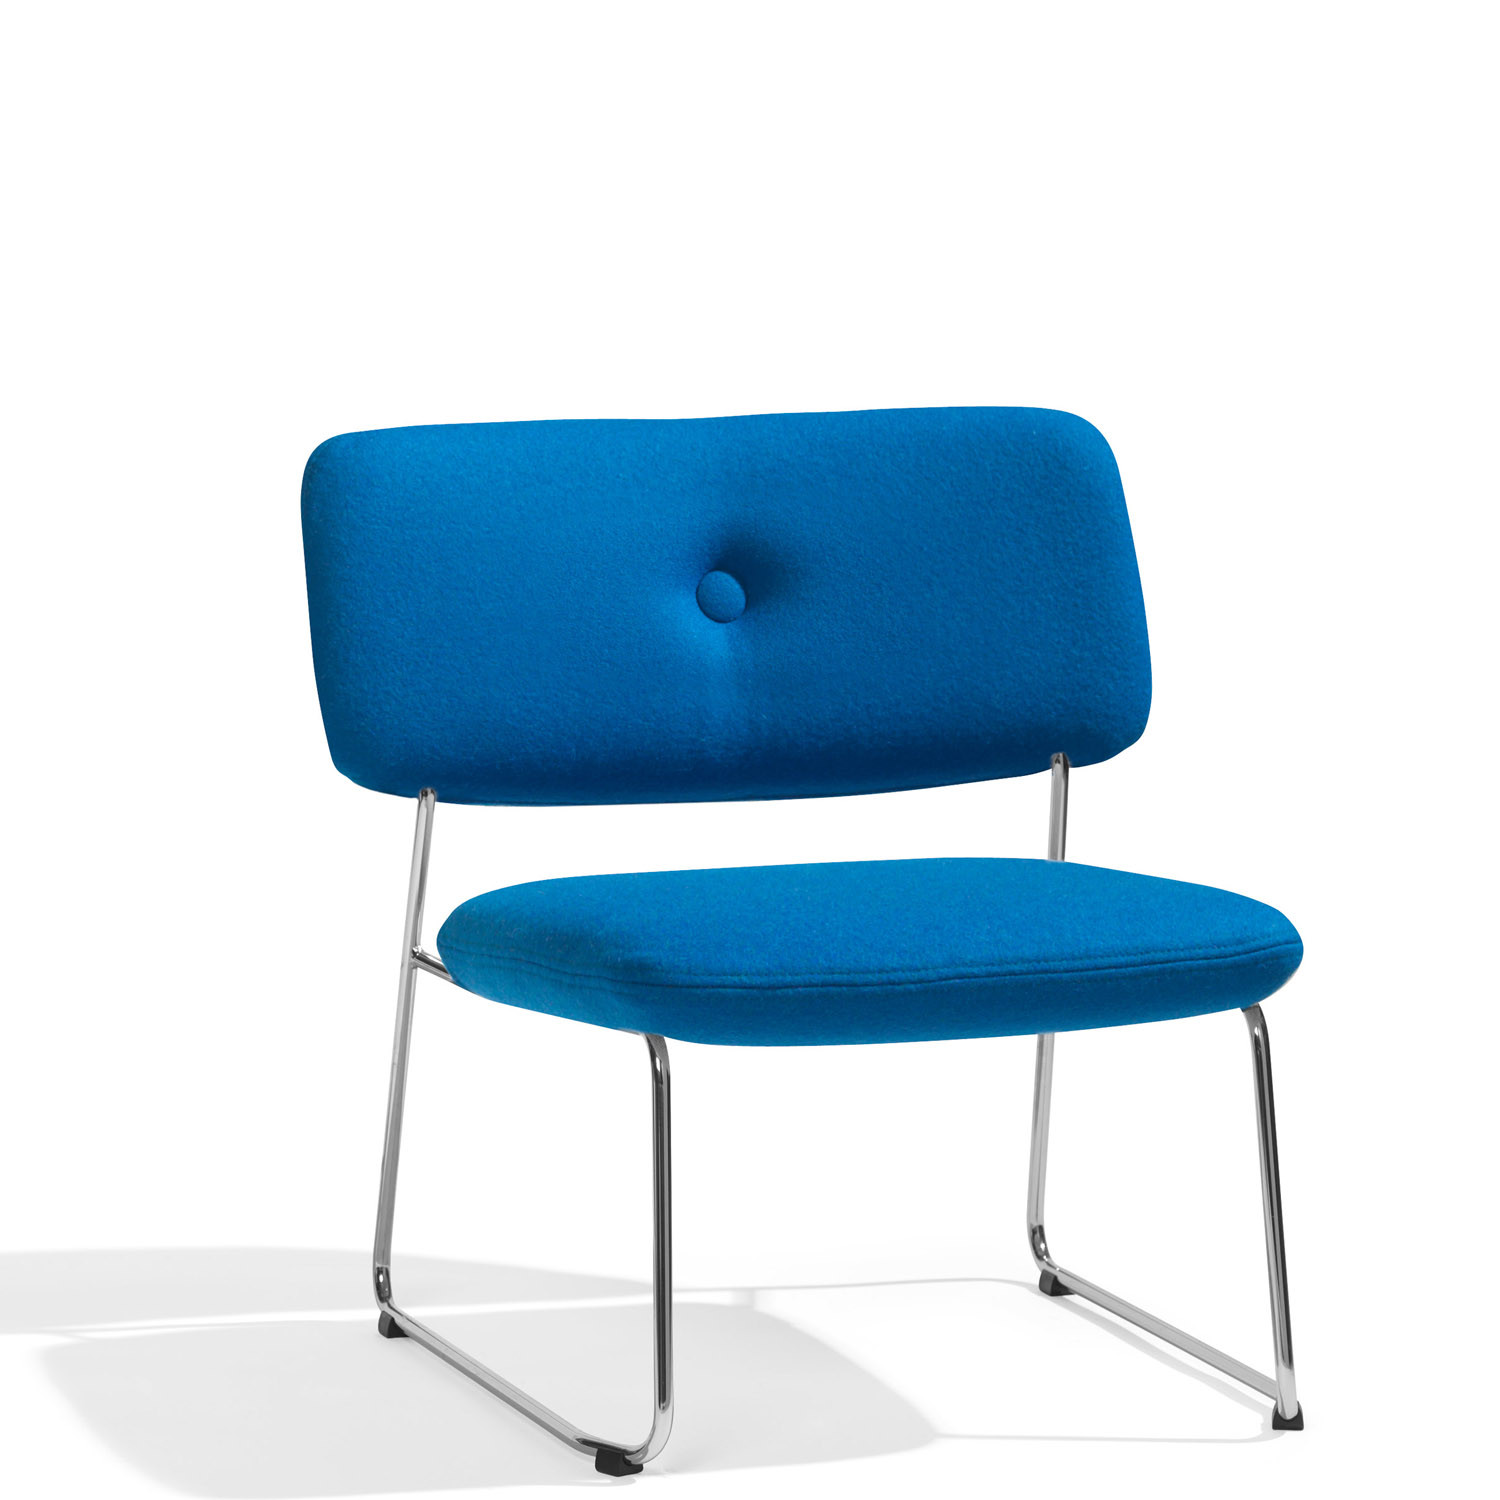 Dundra S71 Lounge Chair by Borselius